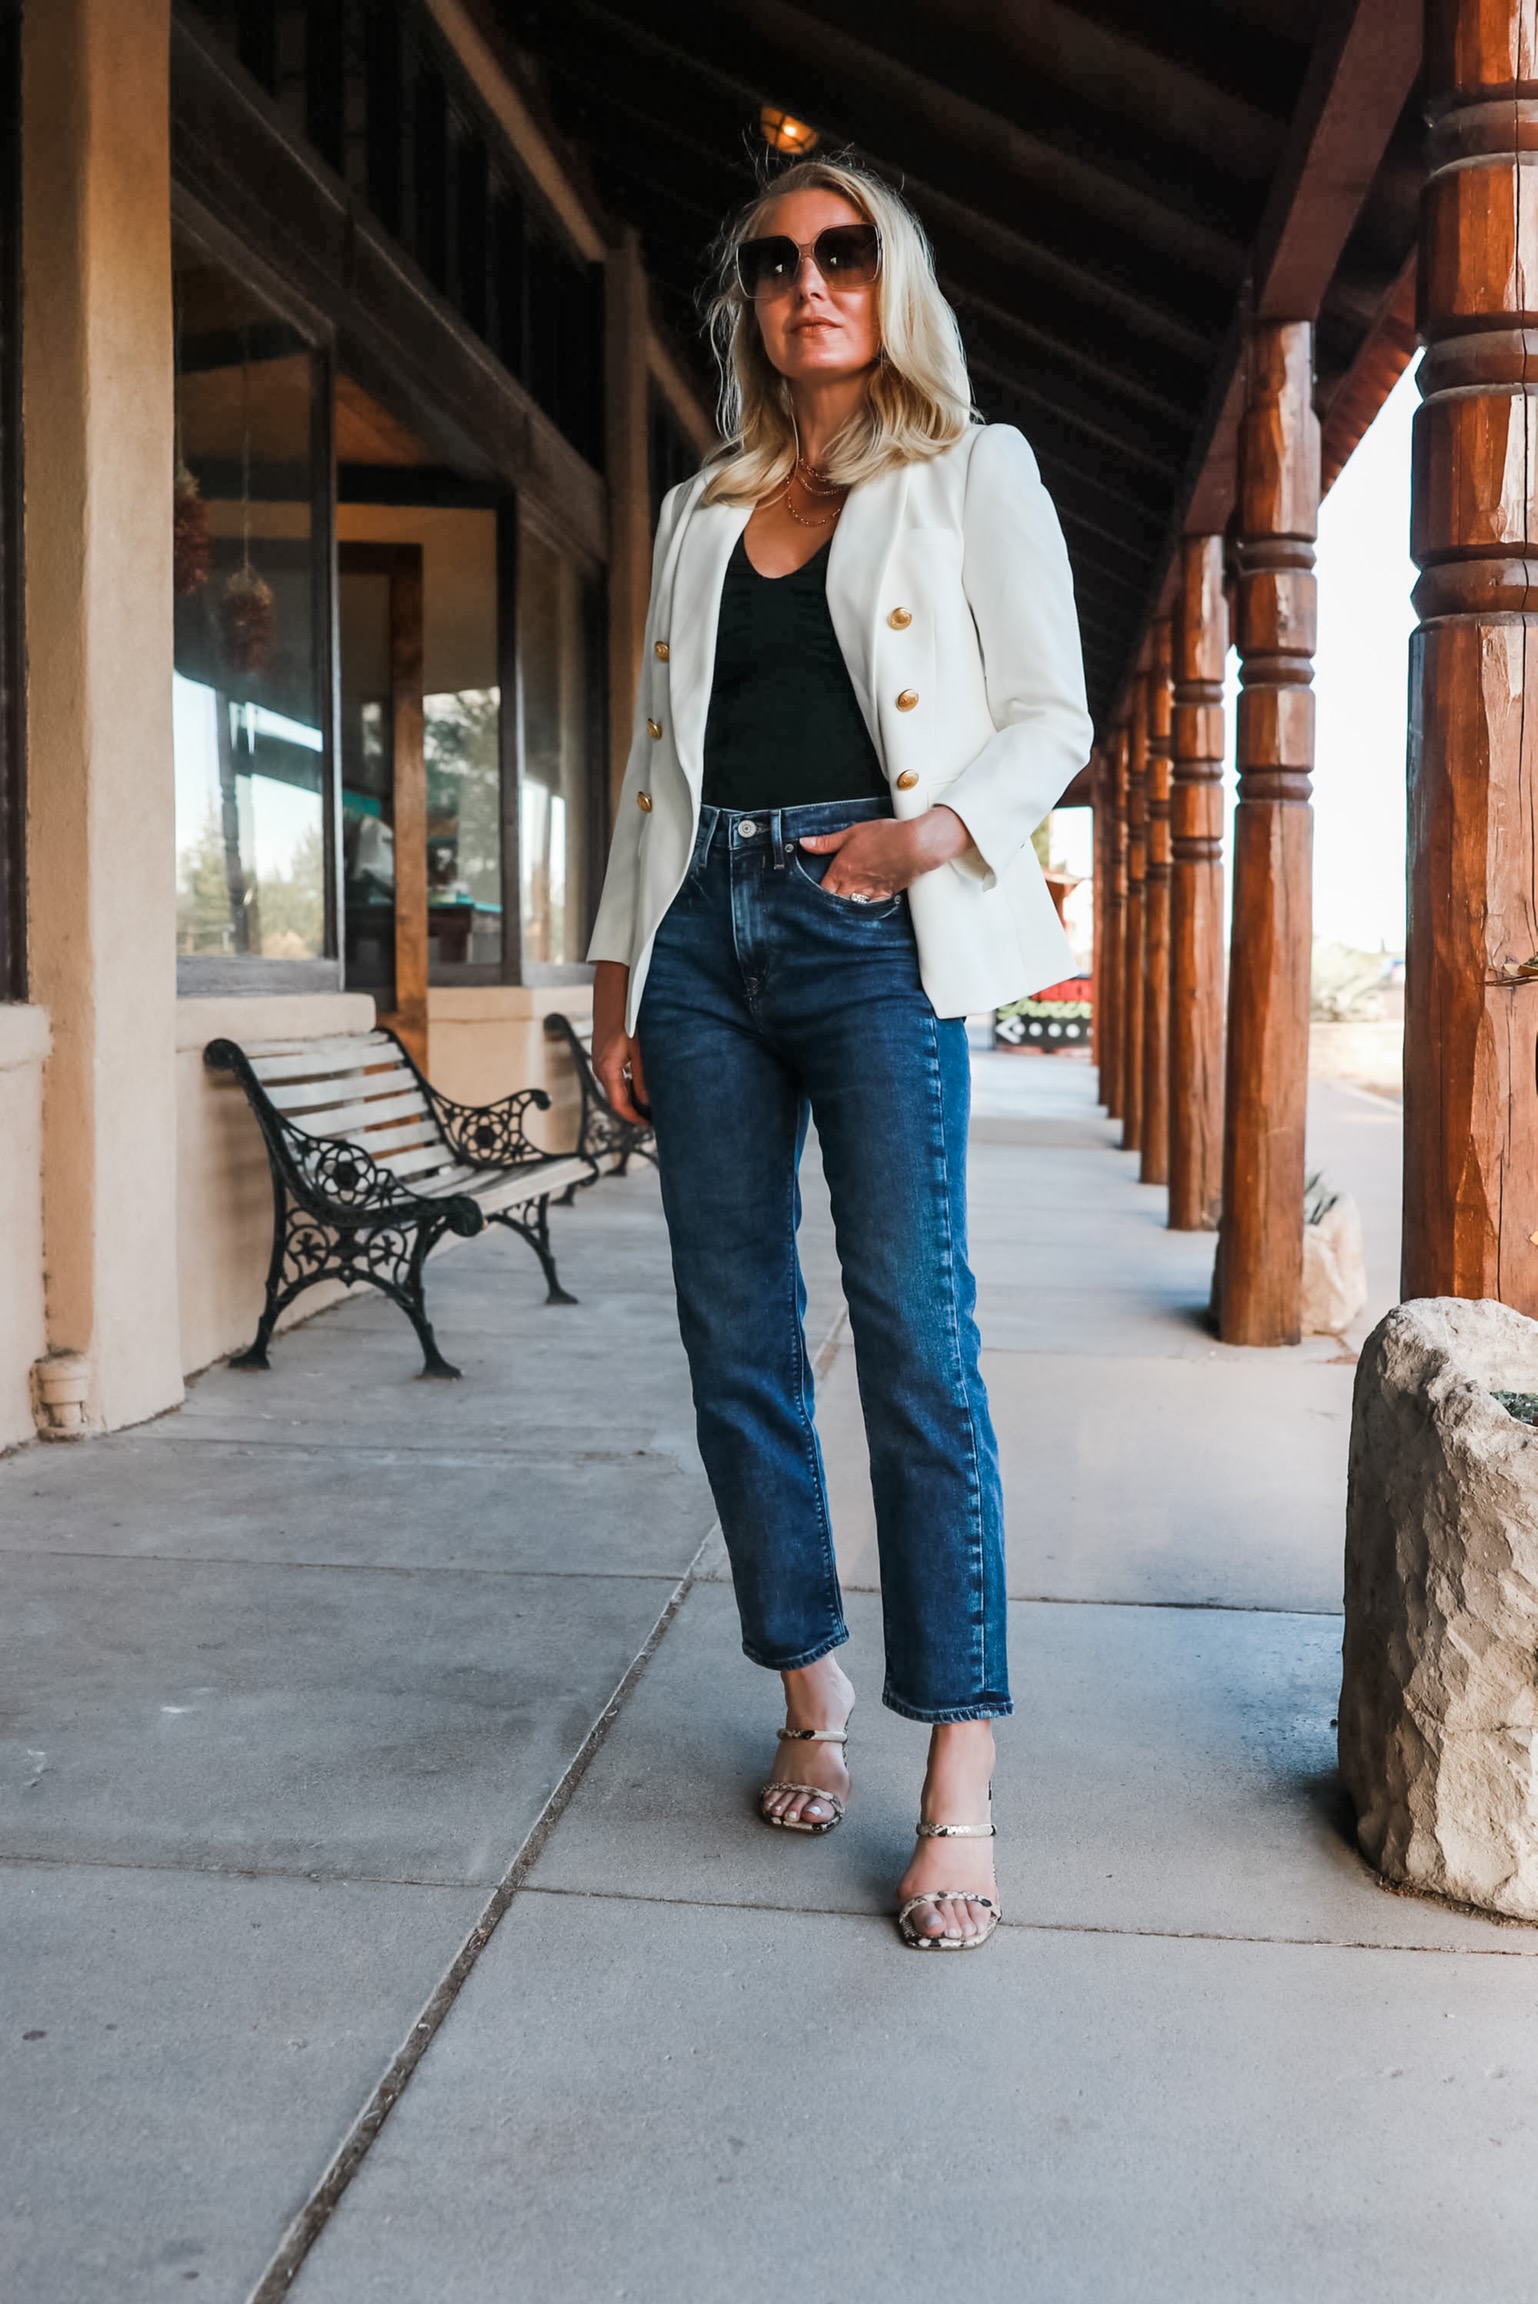 Affordable White Blazer, Fashion blogger Erin Busbee of Busbee Style wearing a white double breasted blazer, mom jeans, black puff shoulder bodysuit, and python sandals from Express in west Texas